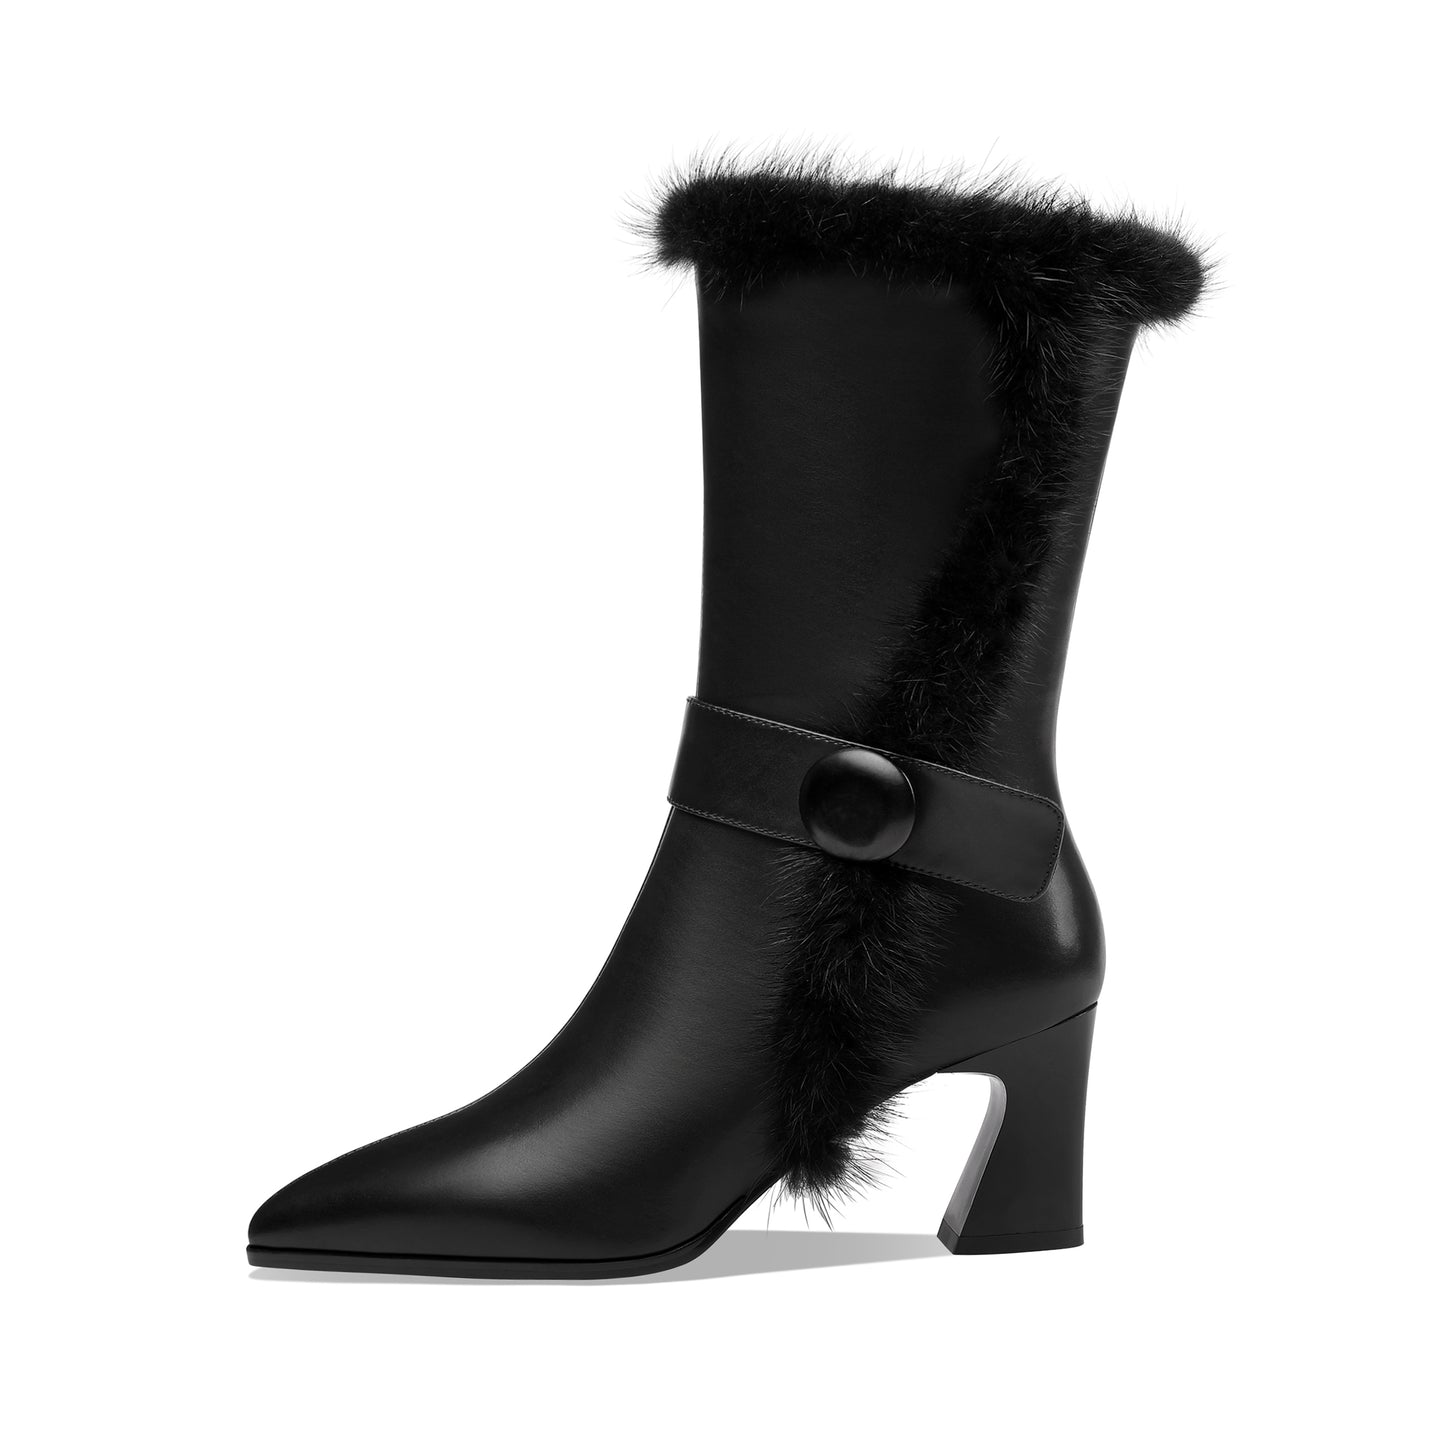 TinaCus Handmade Women's Genuine Leather Spool Heel Side Zip Up Black Mid-Calf Boots with Fur And Chic Belt